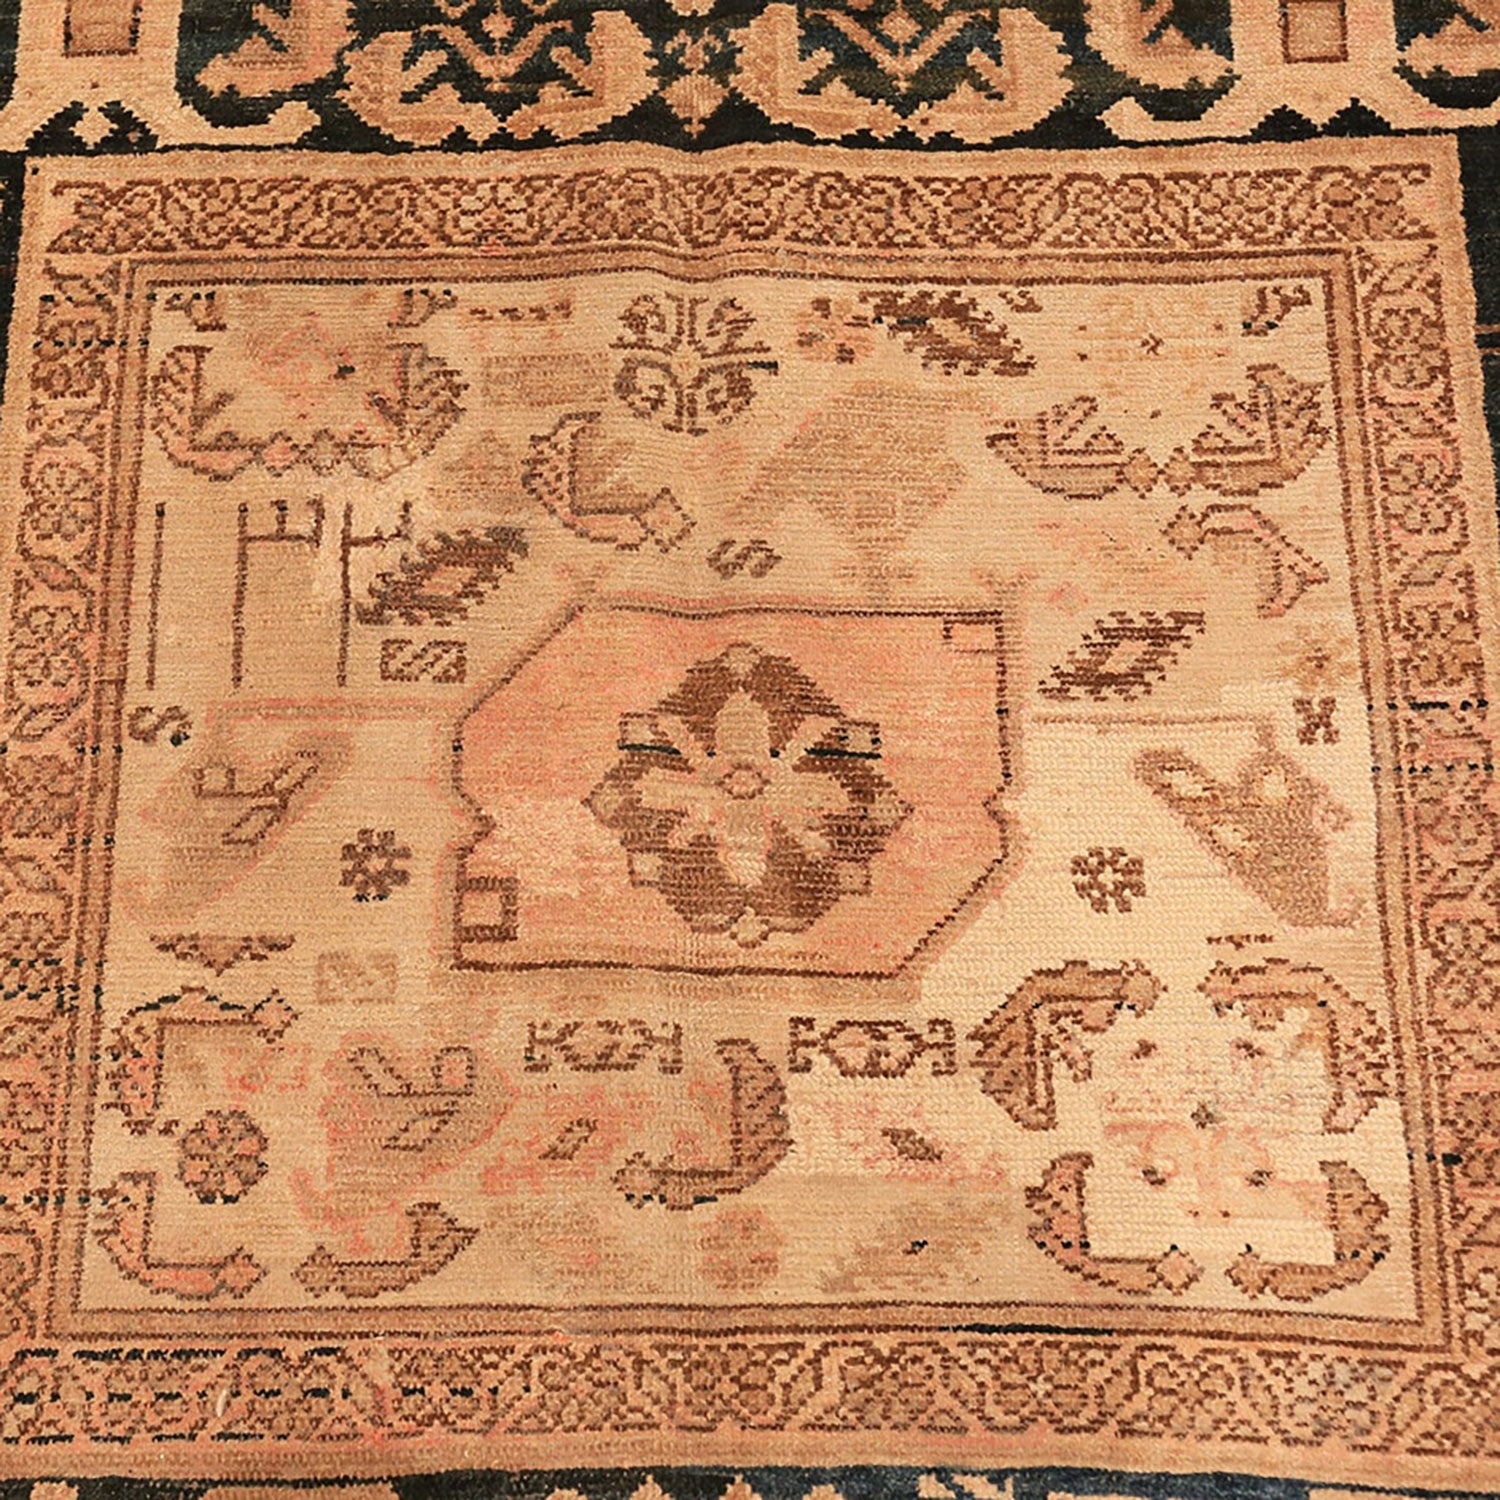 Close-up of an antique carpet with intricate patterns and muted colors.